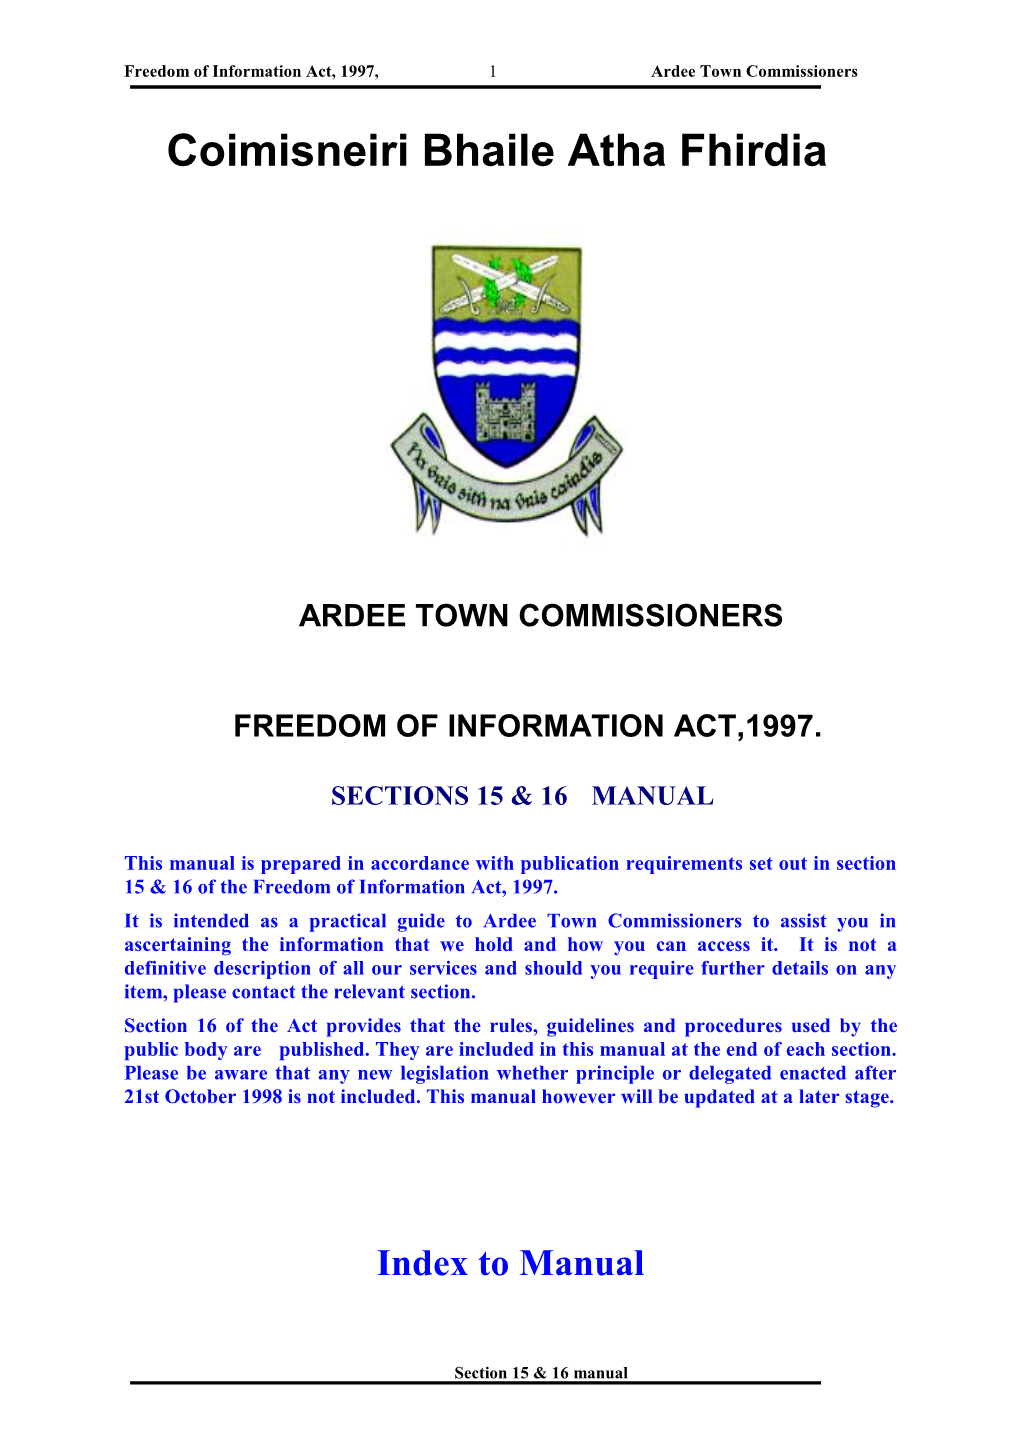 Ardee Town Commissioners